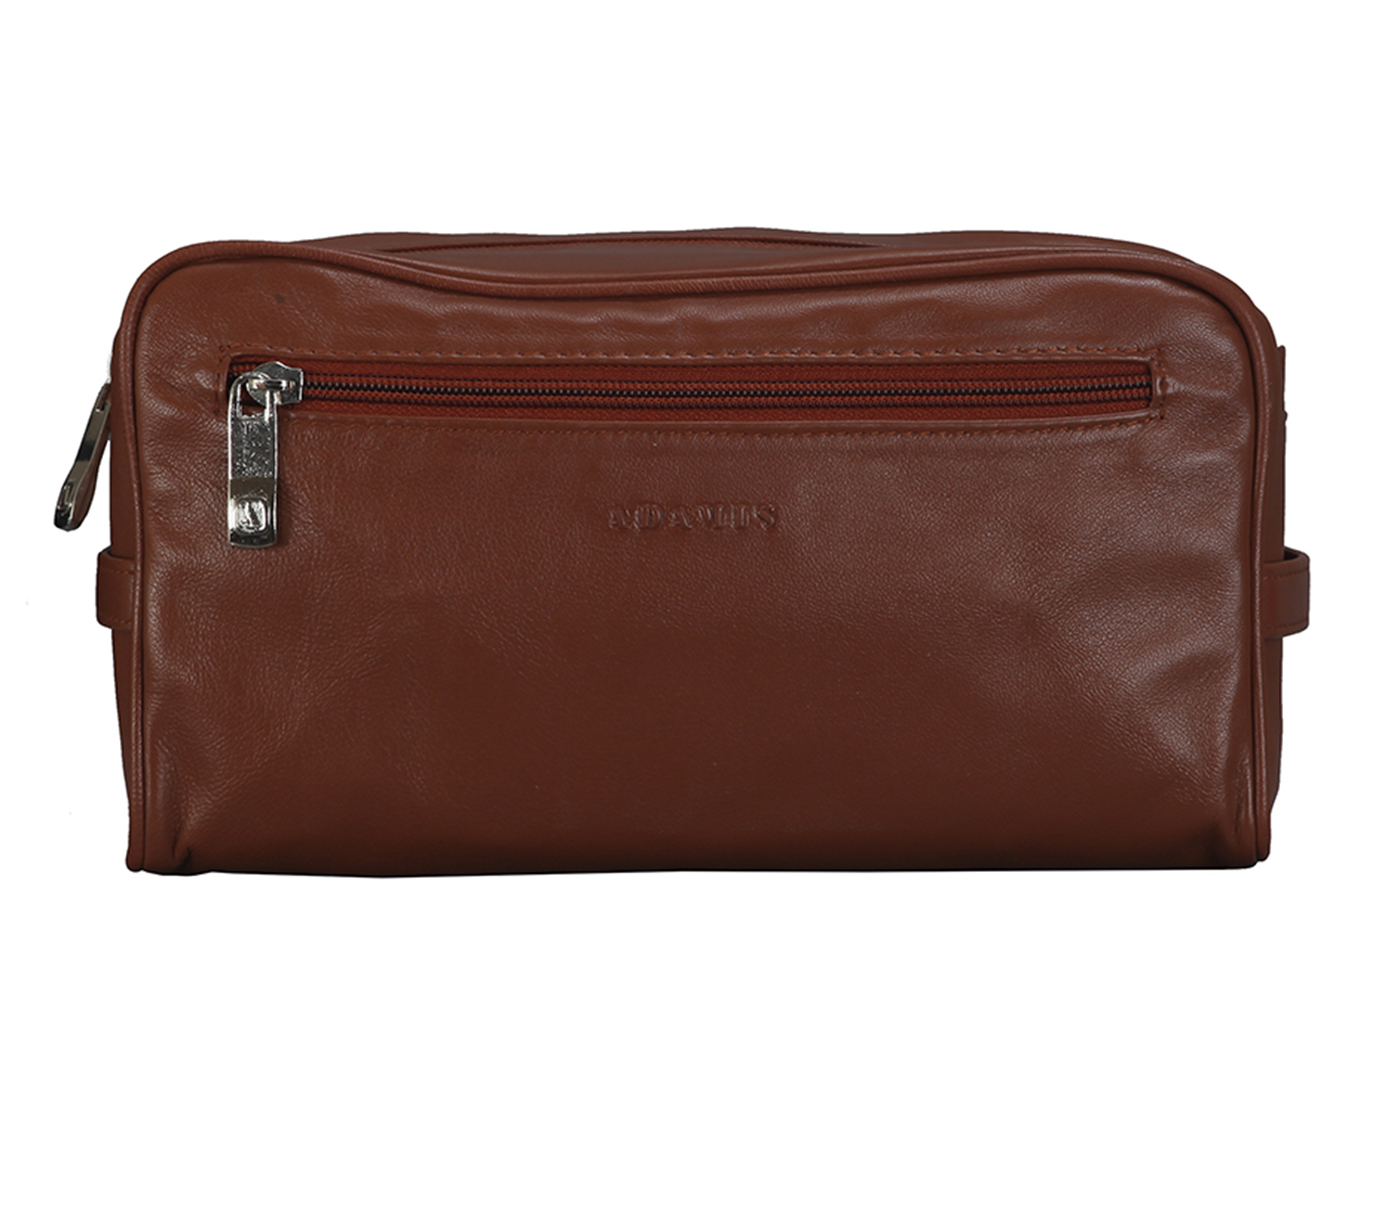 SC2--Unisex Wash & Toiletry travel Bag in Genuine Leather - Tan